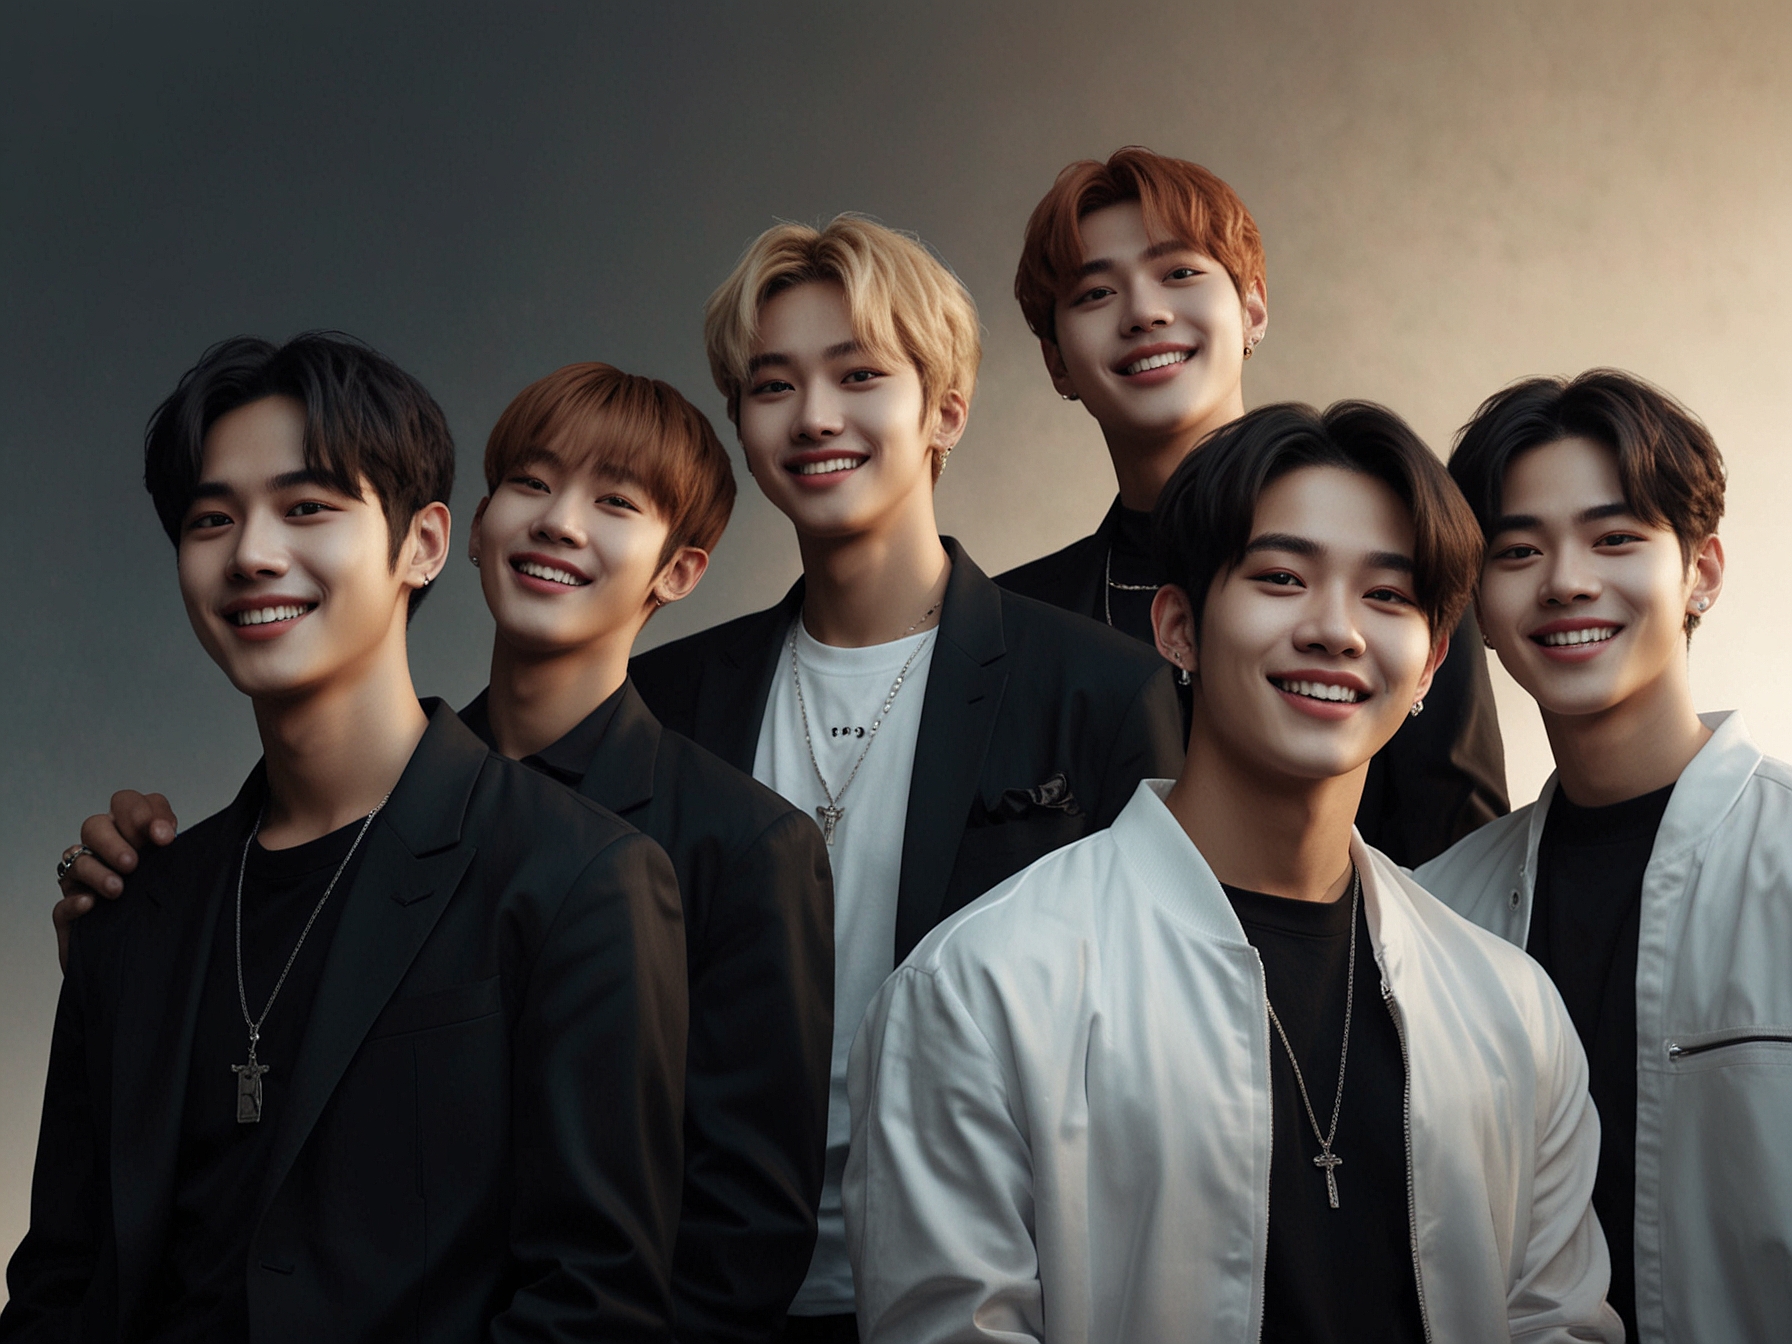 An image of ONEUS members smiling and posing together, highlighting their camaraderie and readiness to take on new challenges in 'Road to Kingdom' Season 2.